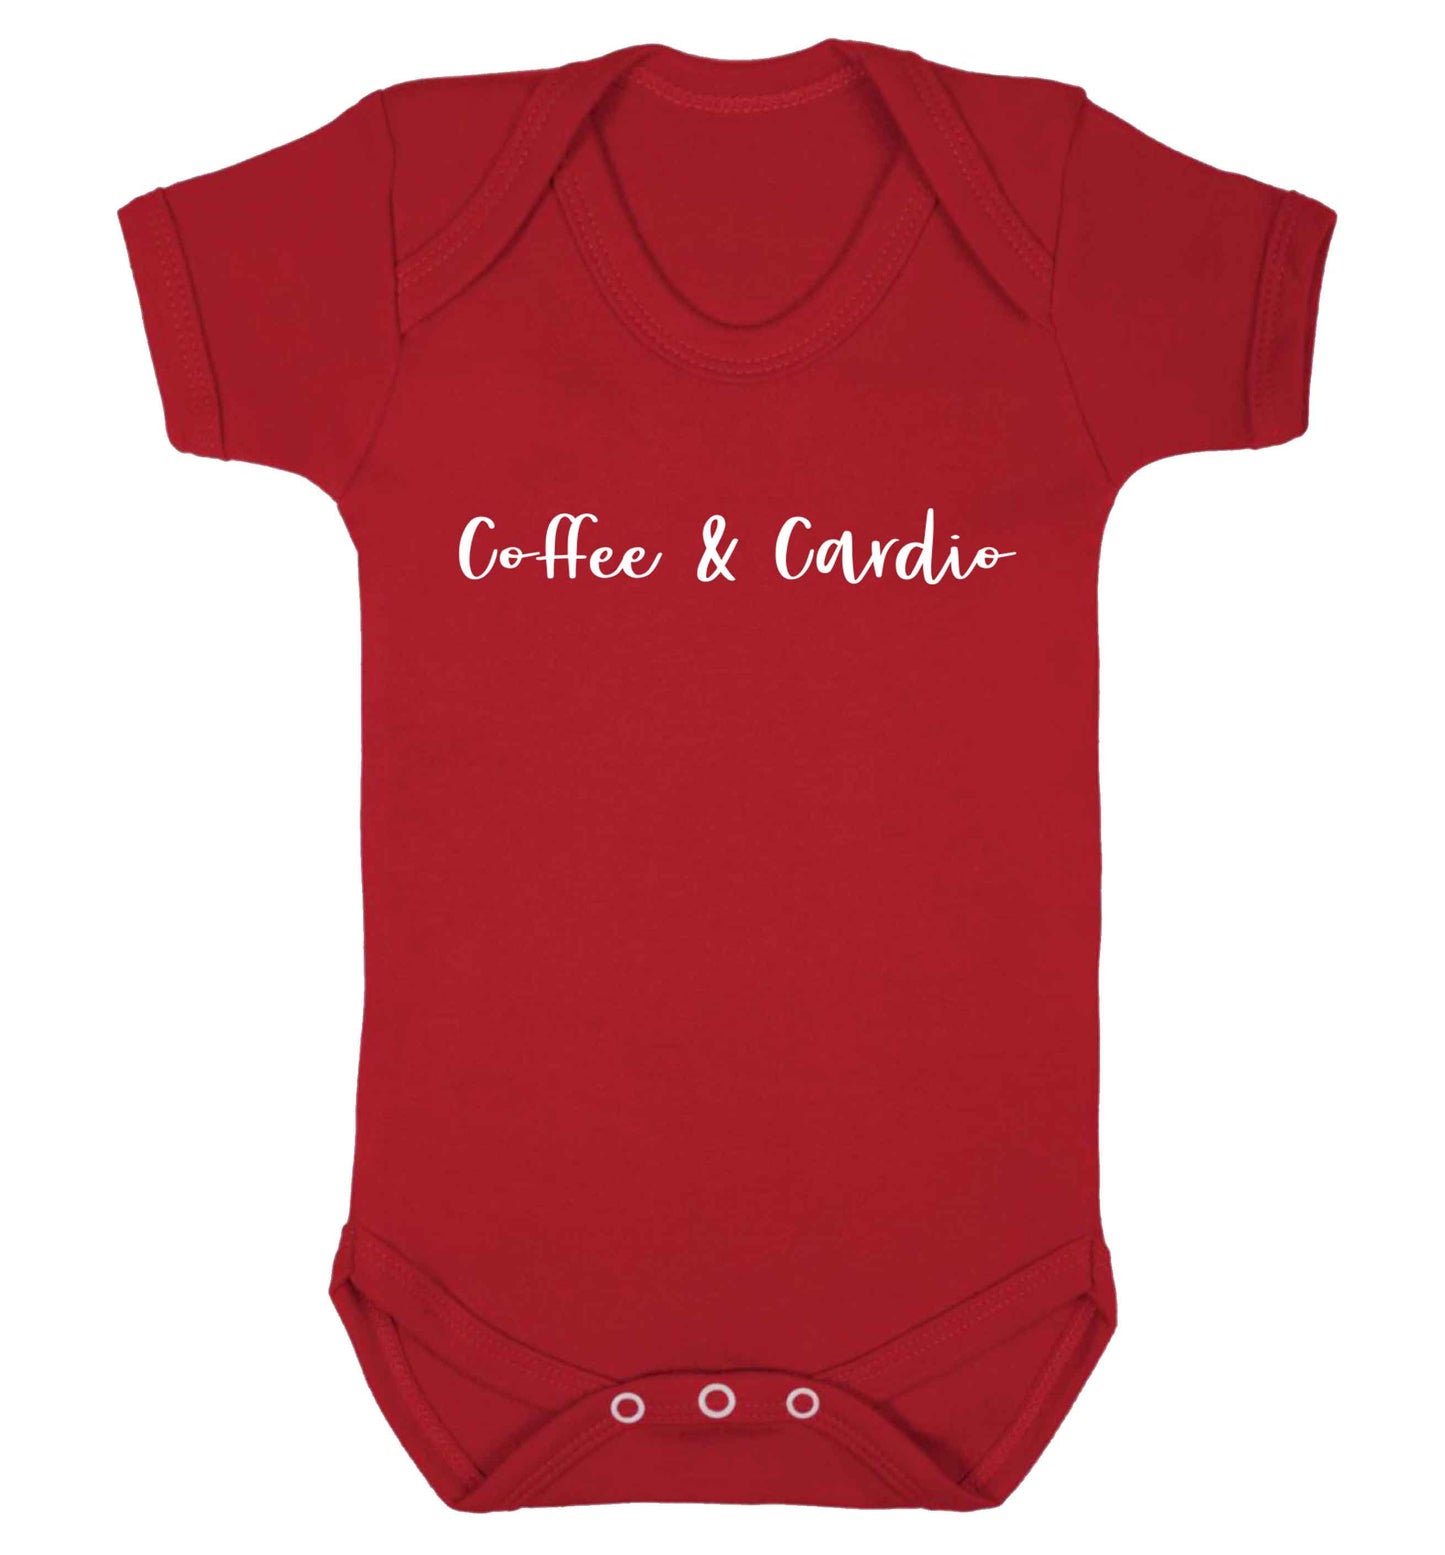 Coffee and cardio Baby Vest red 18-24 months